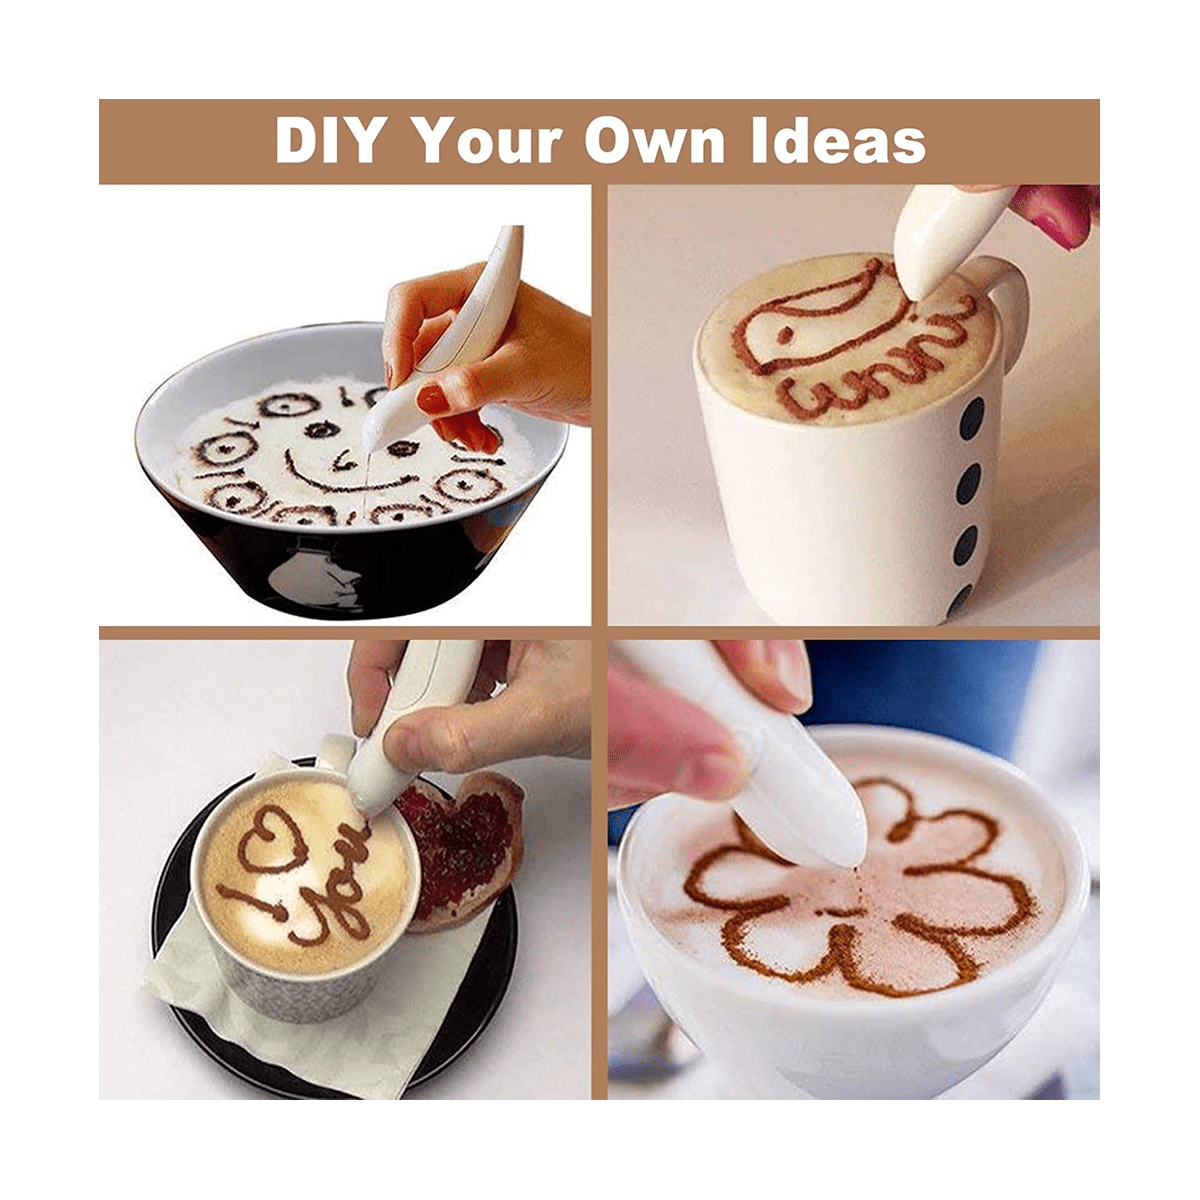 Electrical Latte Art Pen for Coffee Cake Spice Pen Cake Decoration Pen  Coffee Carving Pen Baking Pastry Tools Coffee Decor - AliExpress